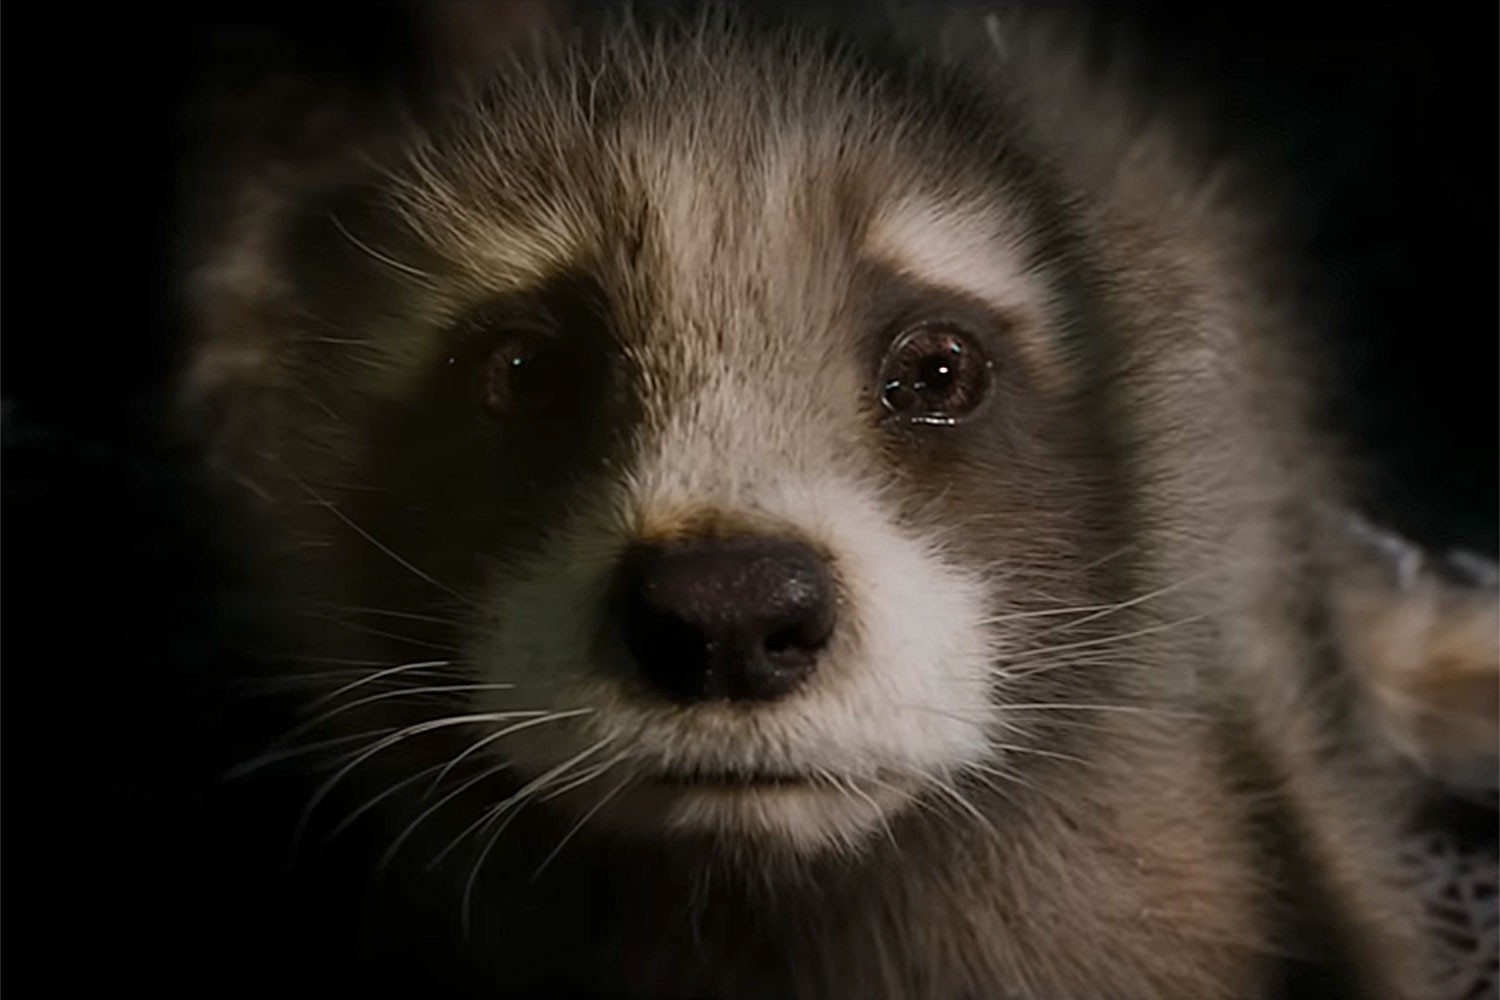 A still from the Guardians of the Galaxy Vol. 3 trailer